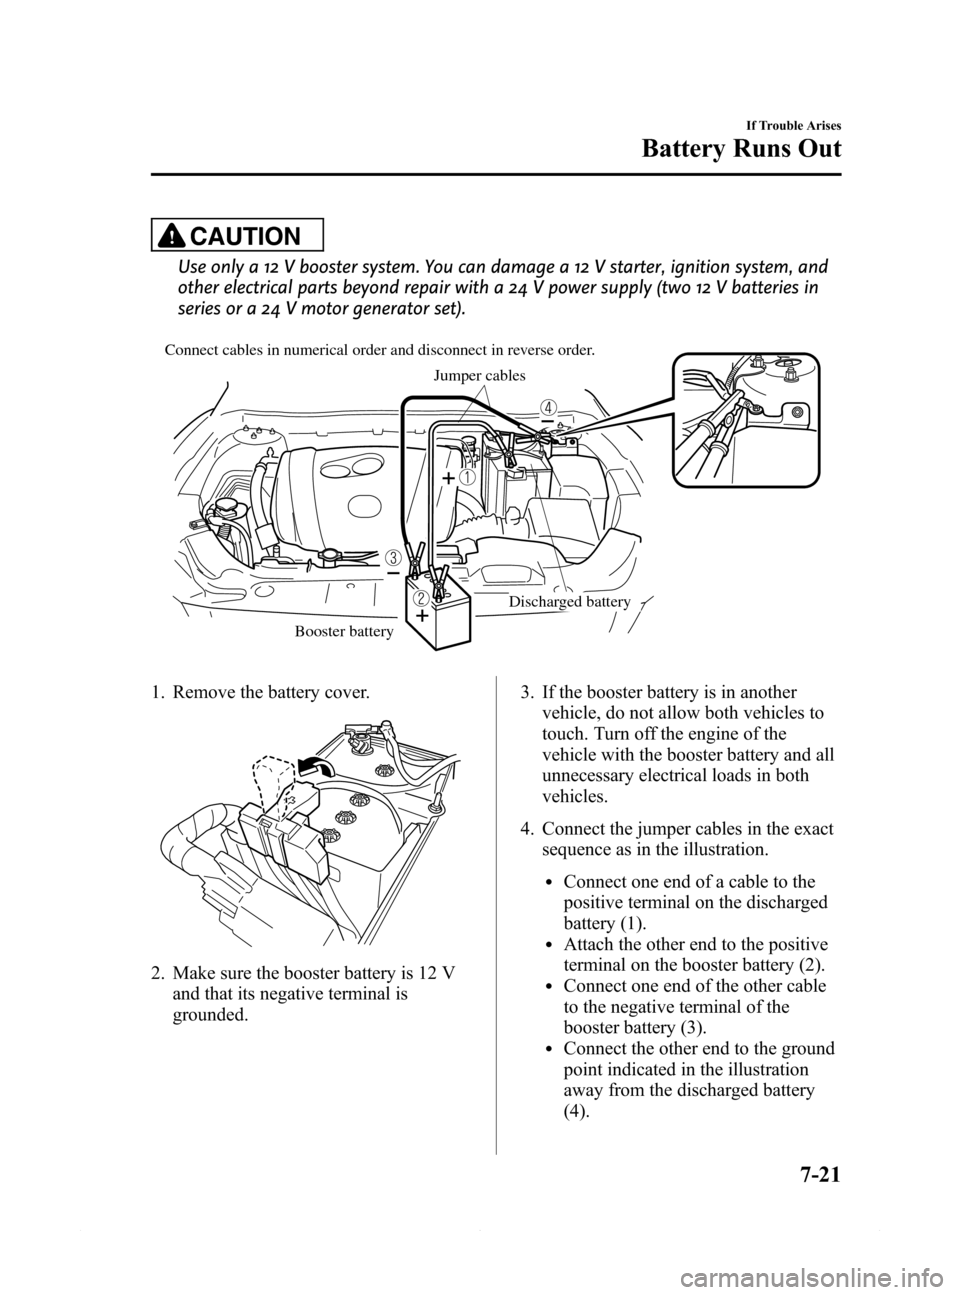 MAZDA MODEL 6 2015  Owners Manual (in English) Black plate (481,1)
CAUTION
Use only a 12 V booster system. You can damage a 12 V starter, ignition system, and
other electrical parts beyond repair with a 24 V power supply (two 12 V batteries in
ser